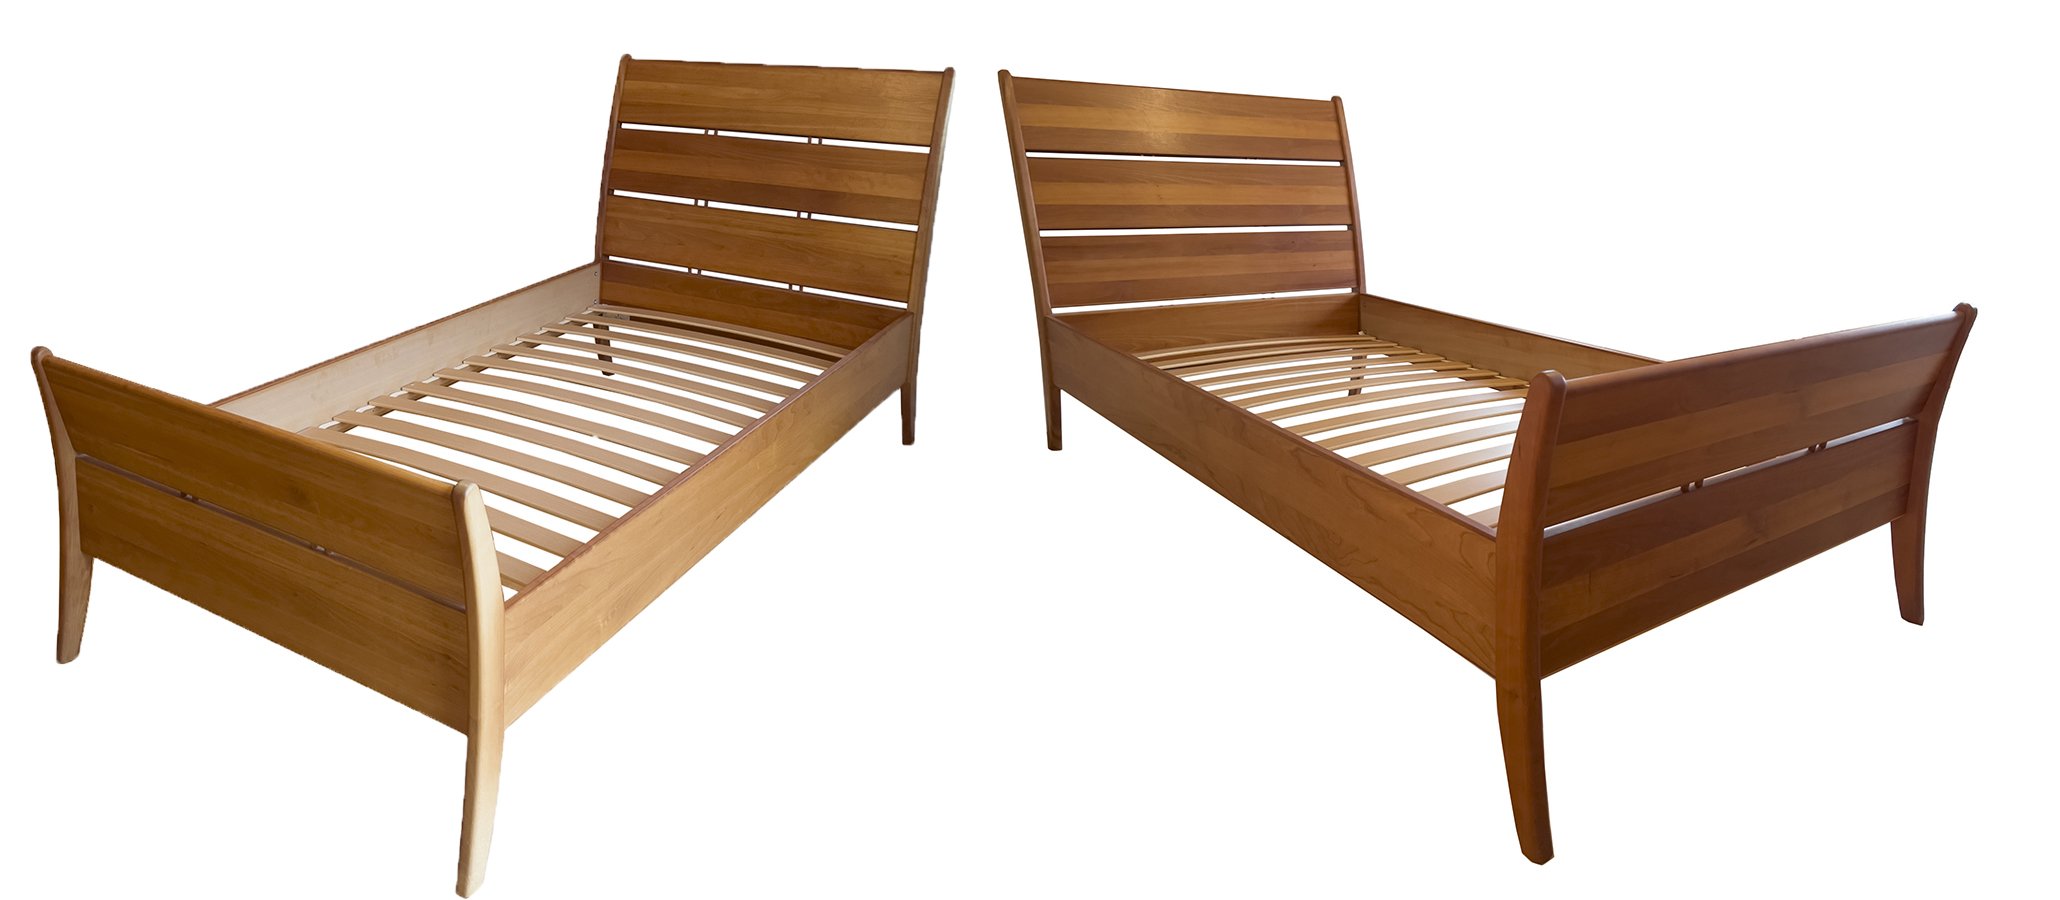 Twin beds: $1900 / pair